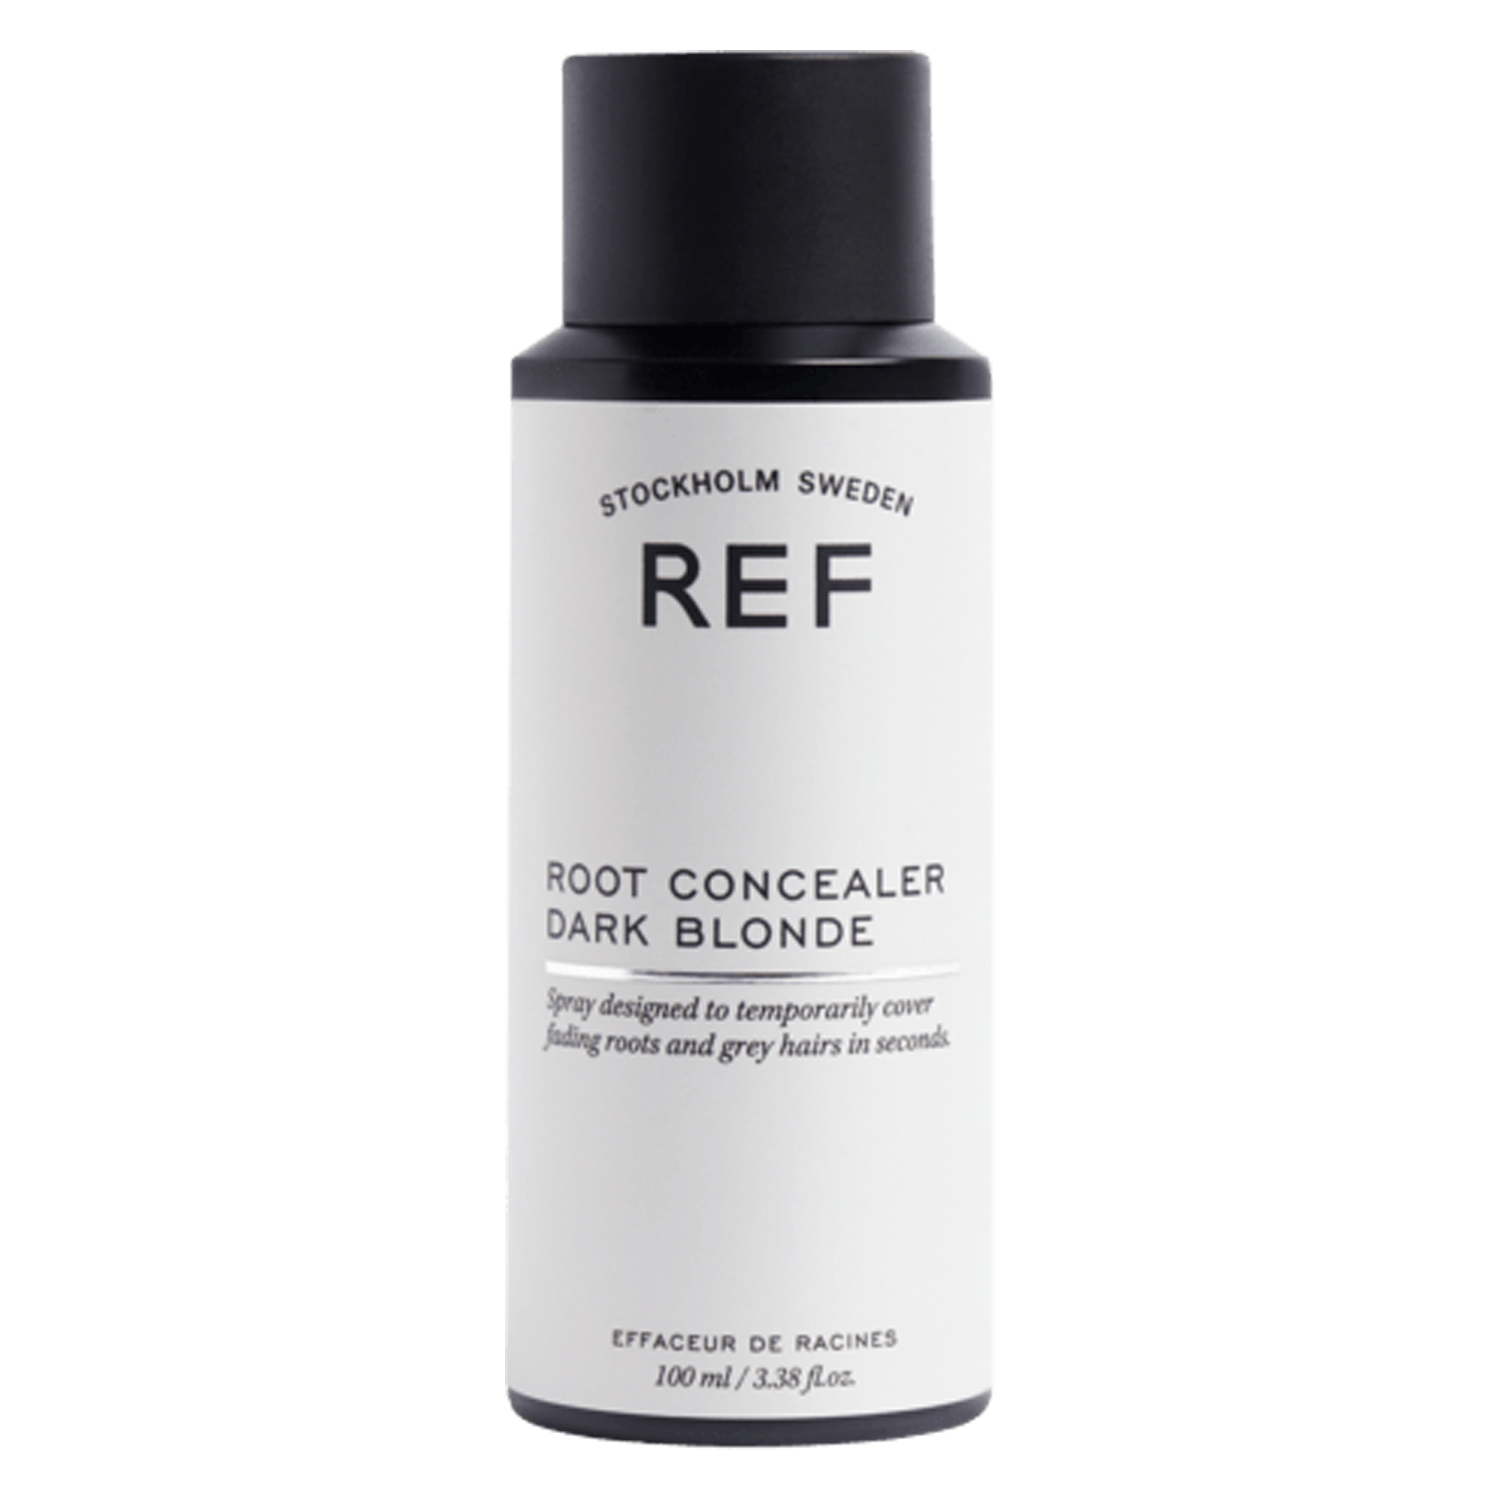 Product image from REF Styling - Root Concealer Dark Blonde